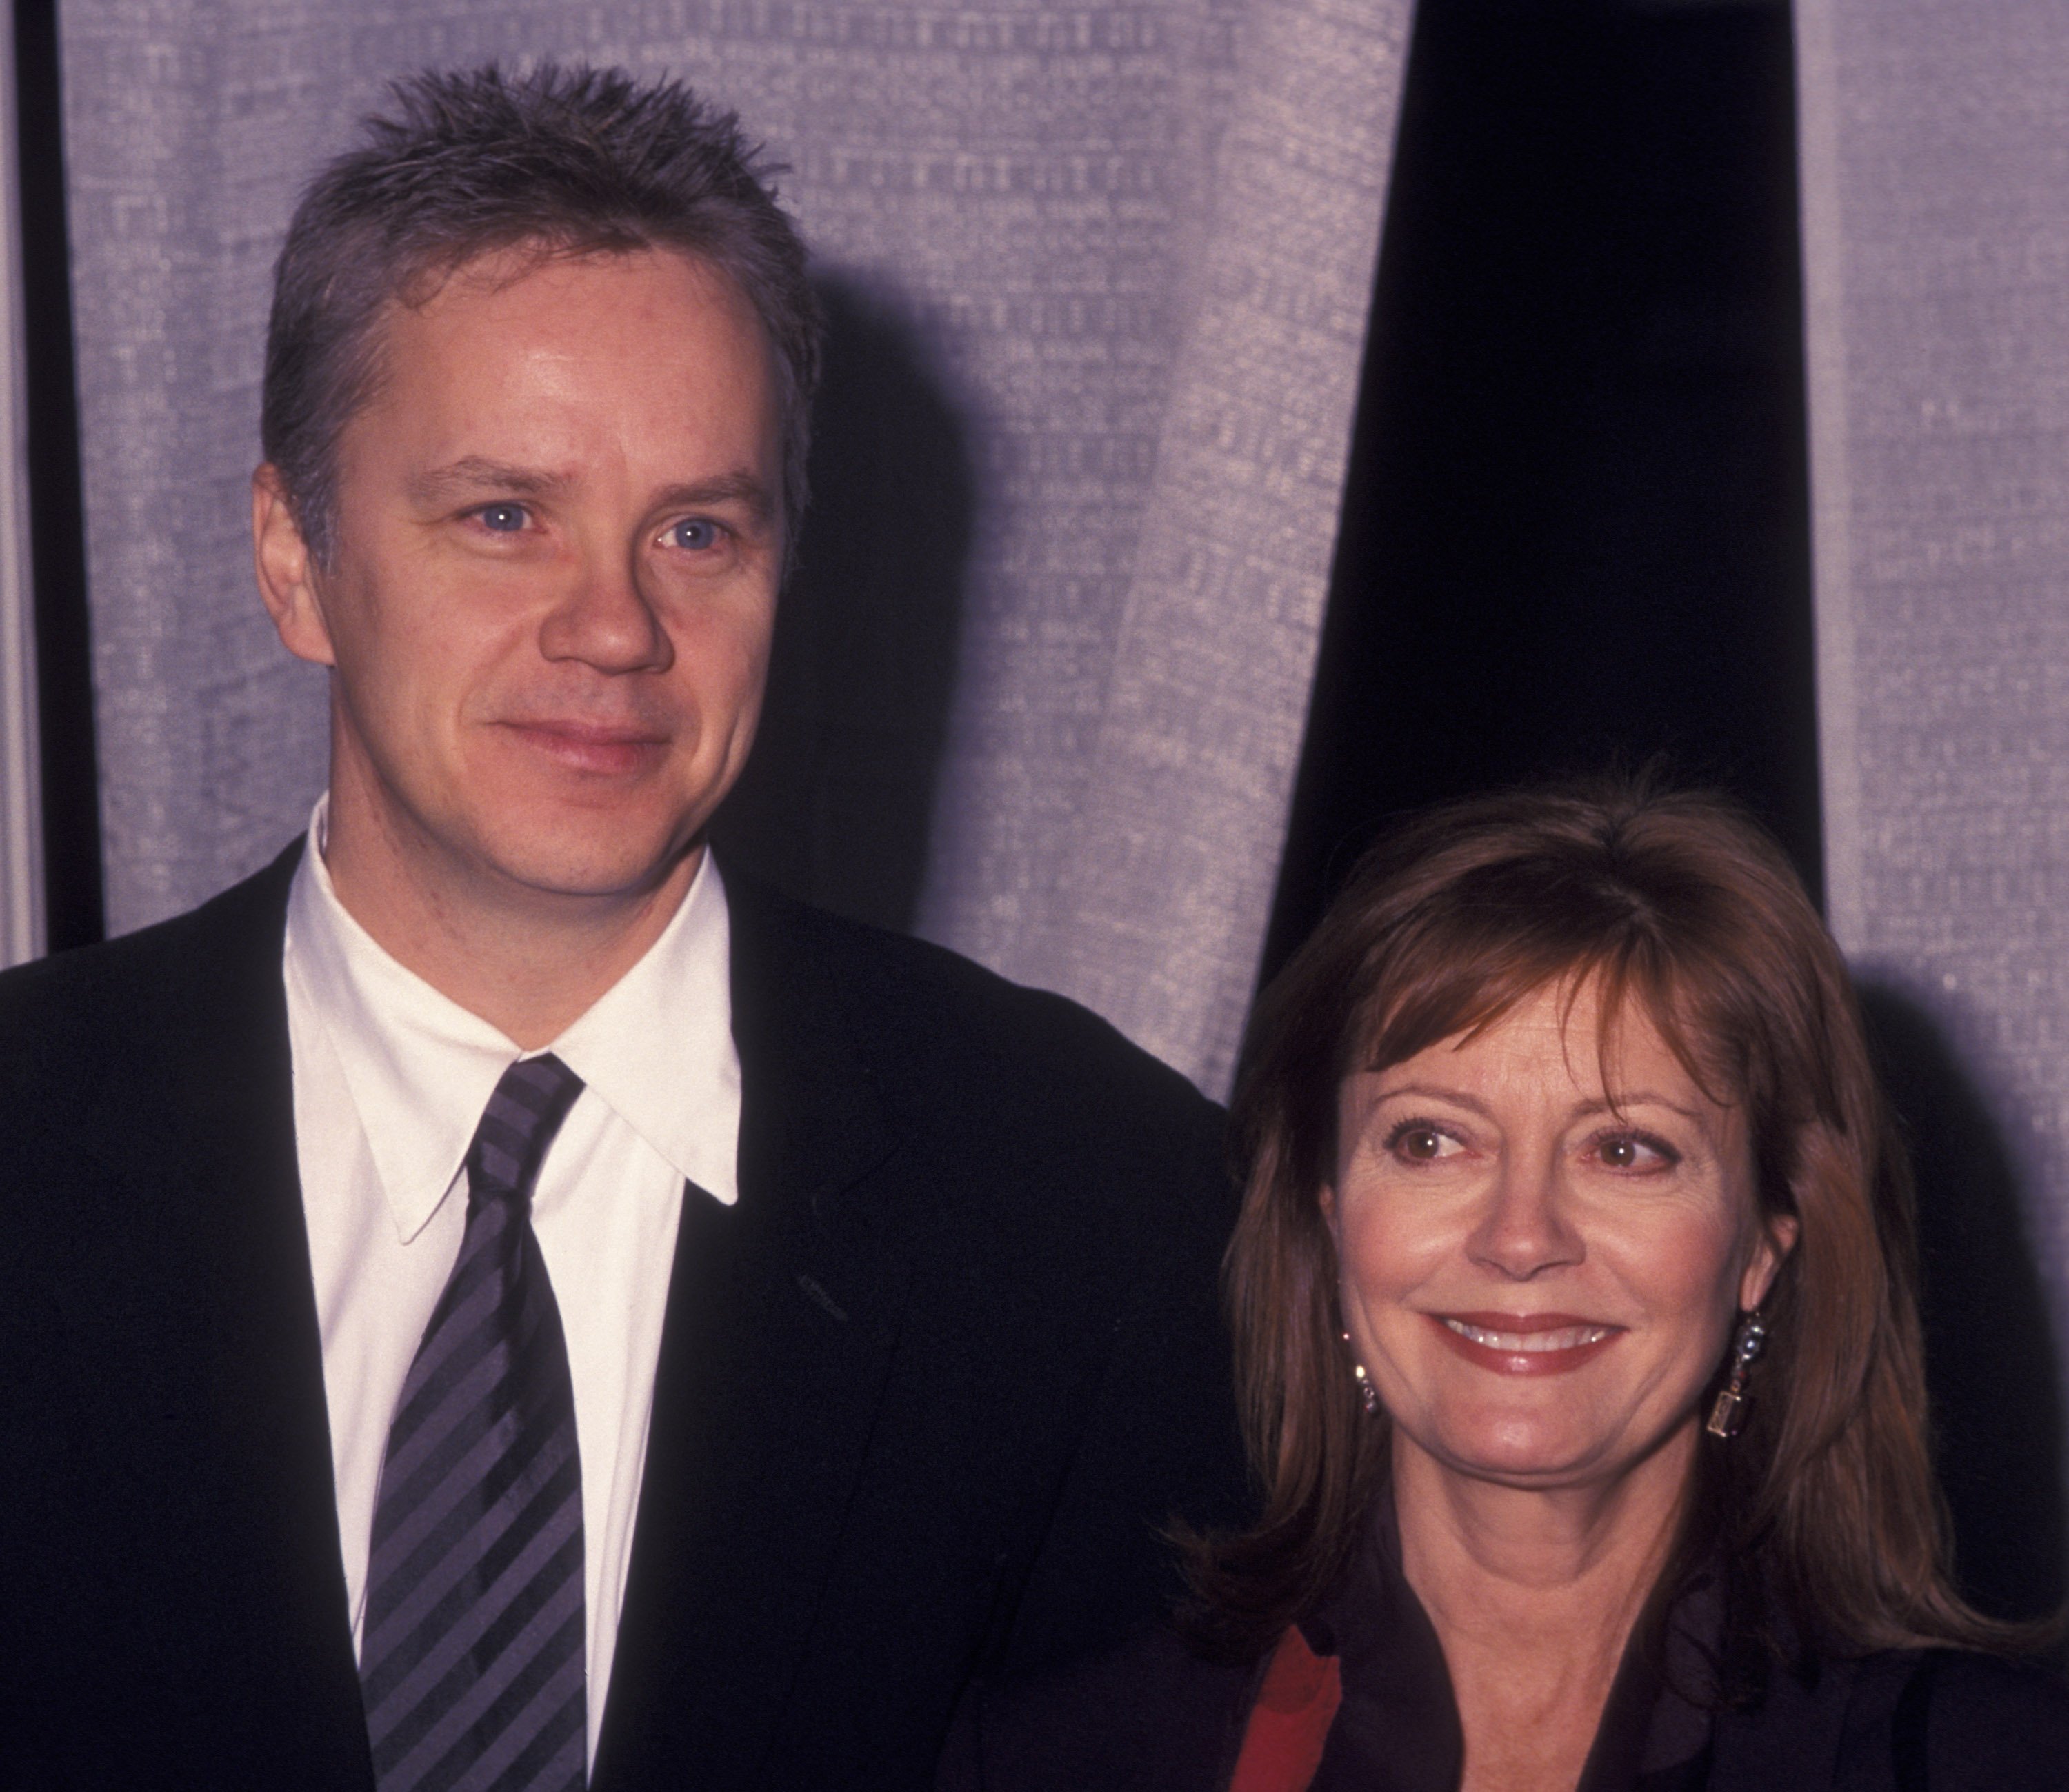 Tim Robbins and actress Susan Sarandon attend The Vineyard Theater Gala on December 2, 2002 at the Union Square Theater in New York City.  | Source: Getty Images